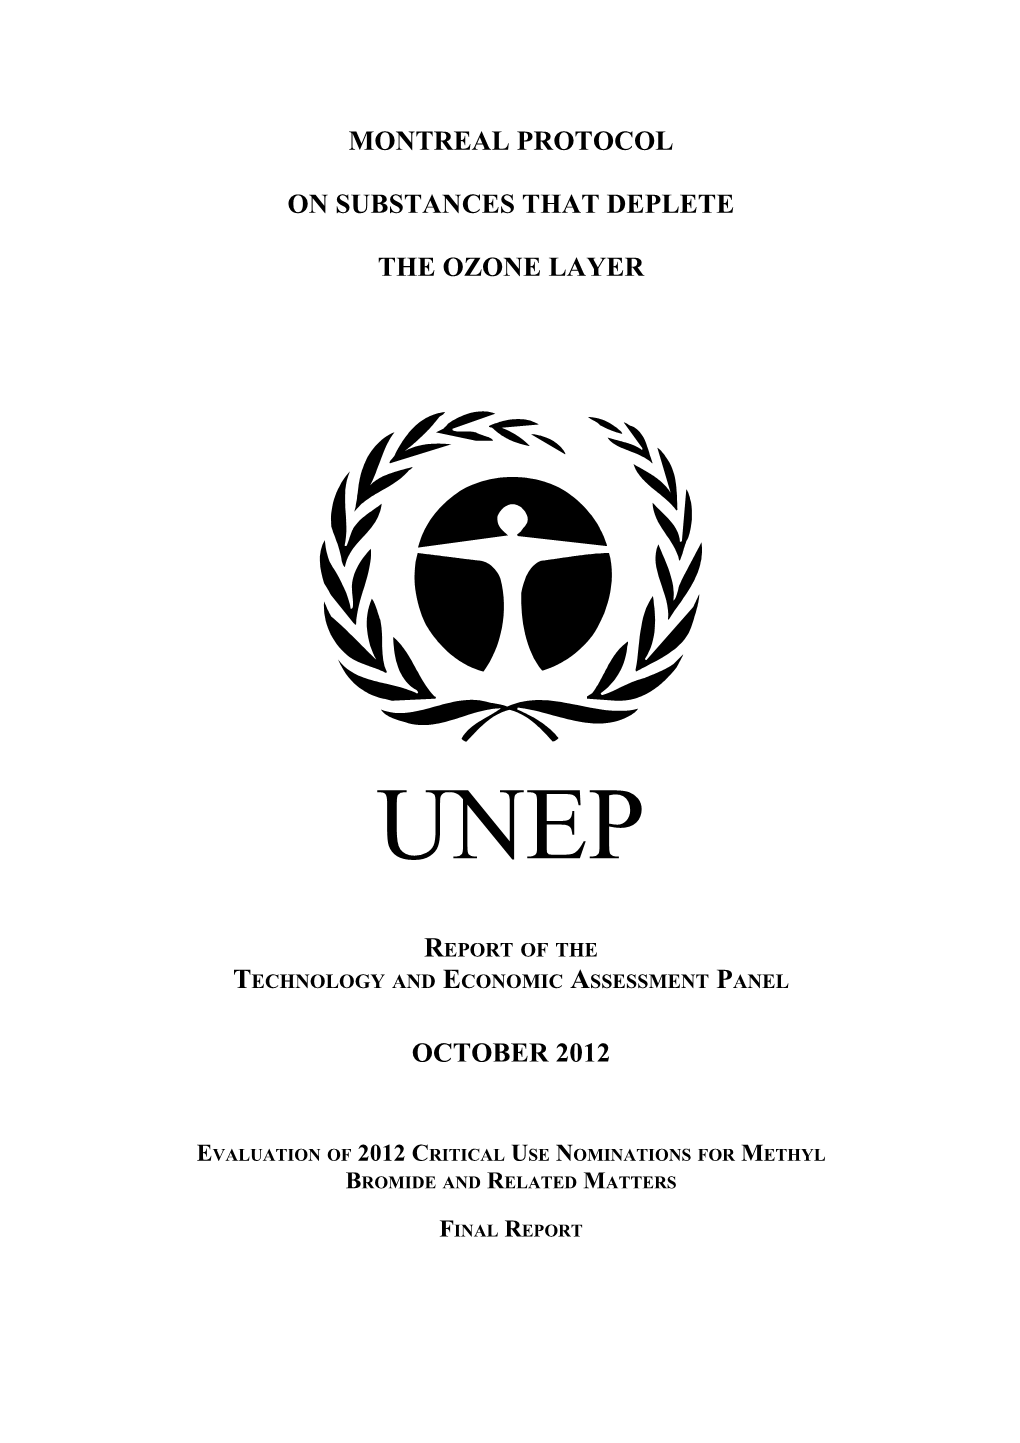 TEAP October 2012 Evaluation of 2012 Critical Use Nominations for Methyl Bromide and Related